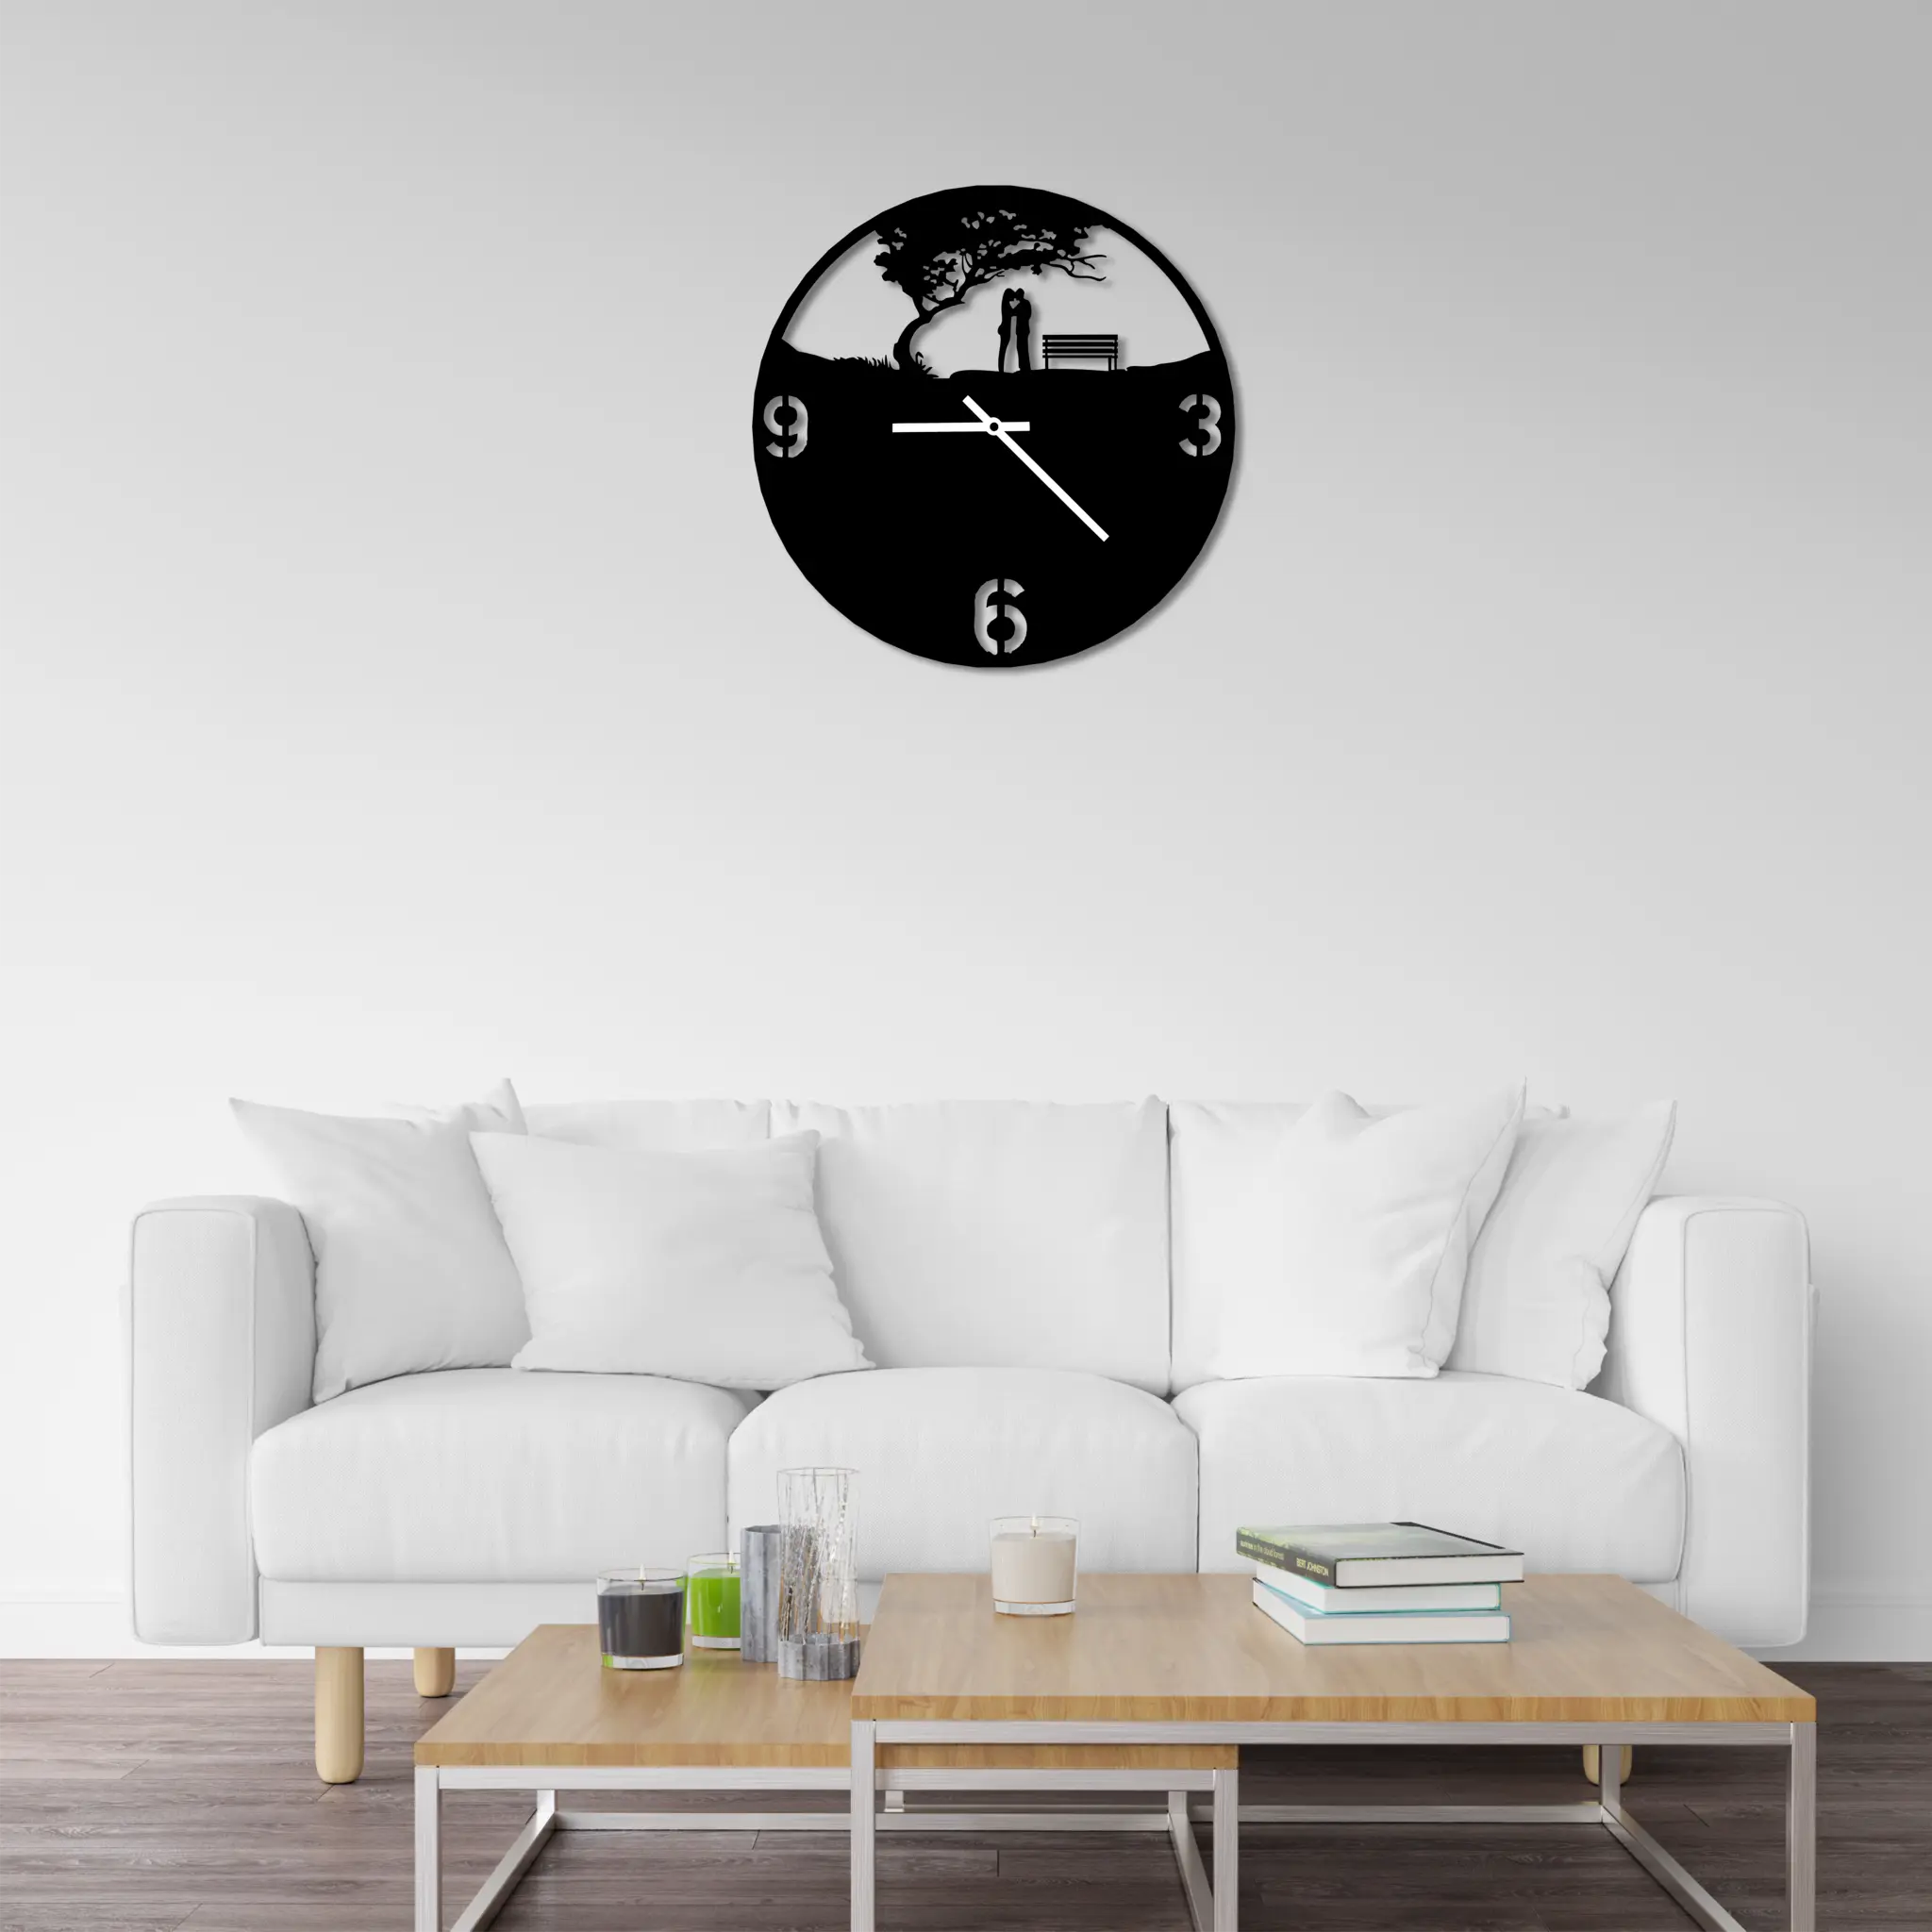 Anniversary Metal Record Artistic Wall Clock for Love and Romance in Living Room Decoration for a Couple; a Special Present for a Married Couple